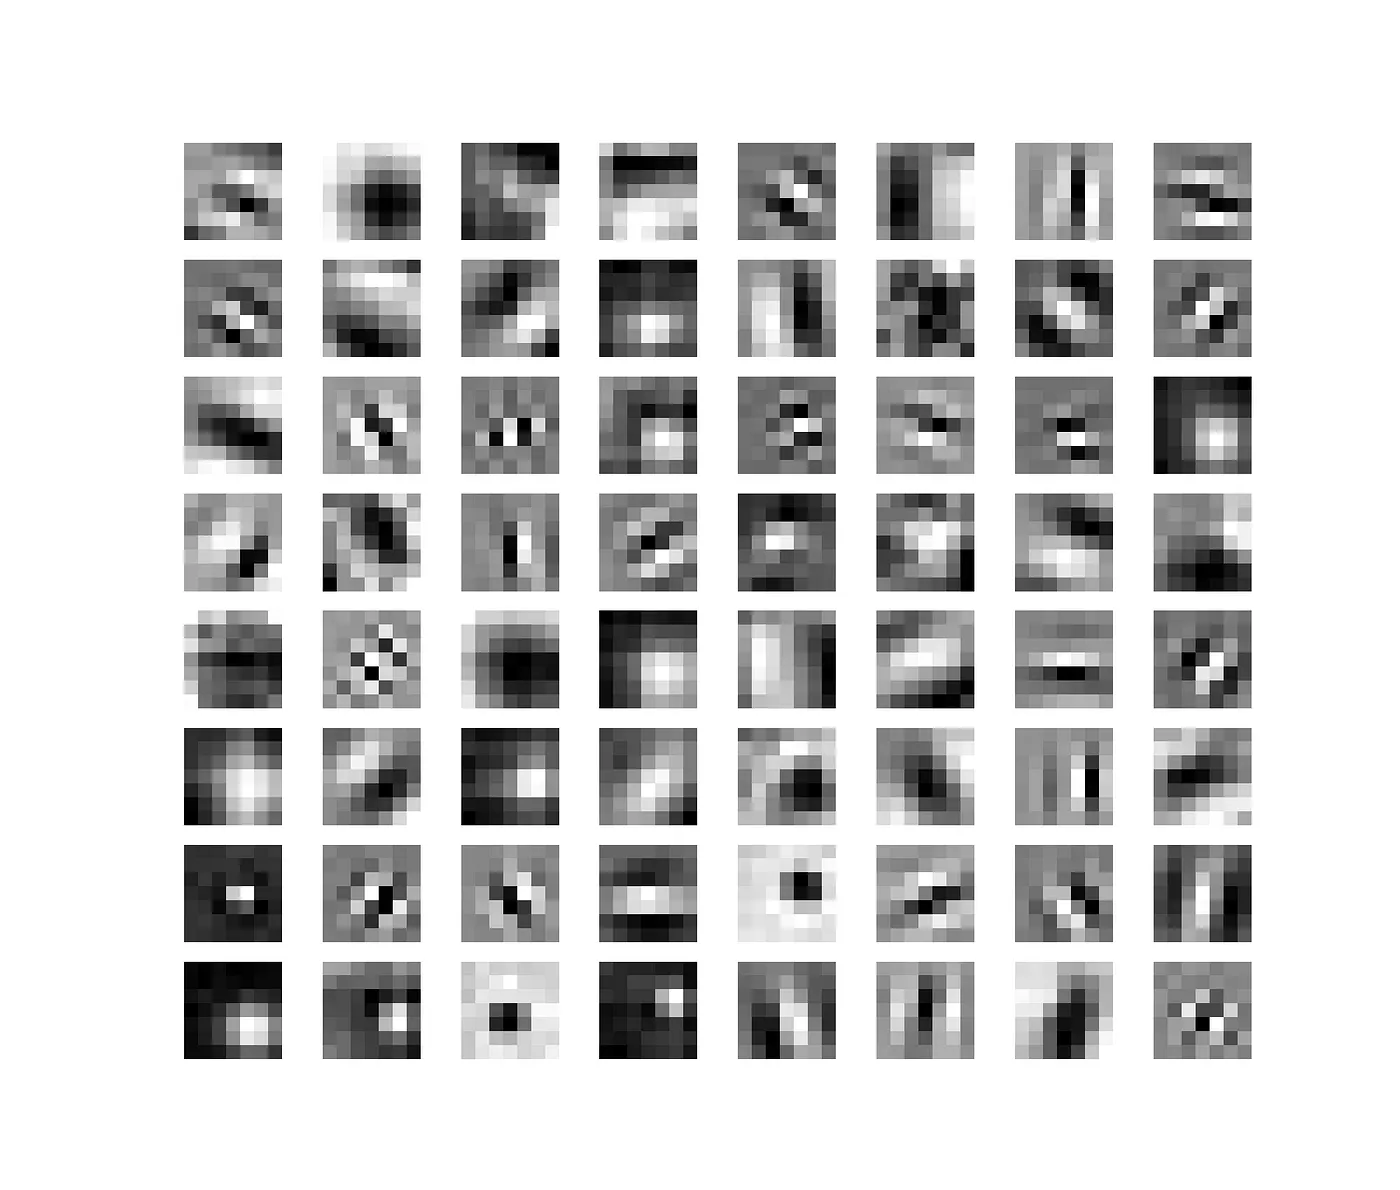 How to train a Computer to Classify Distinct Images Using a Convolutional Neural Network